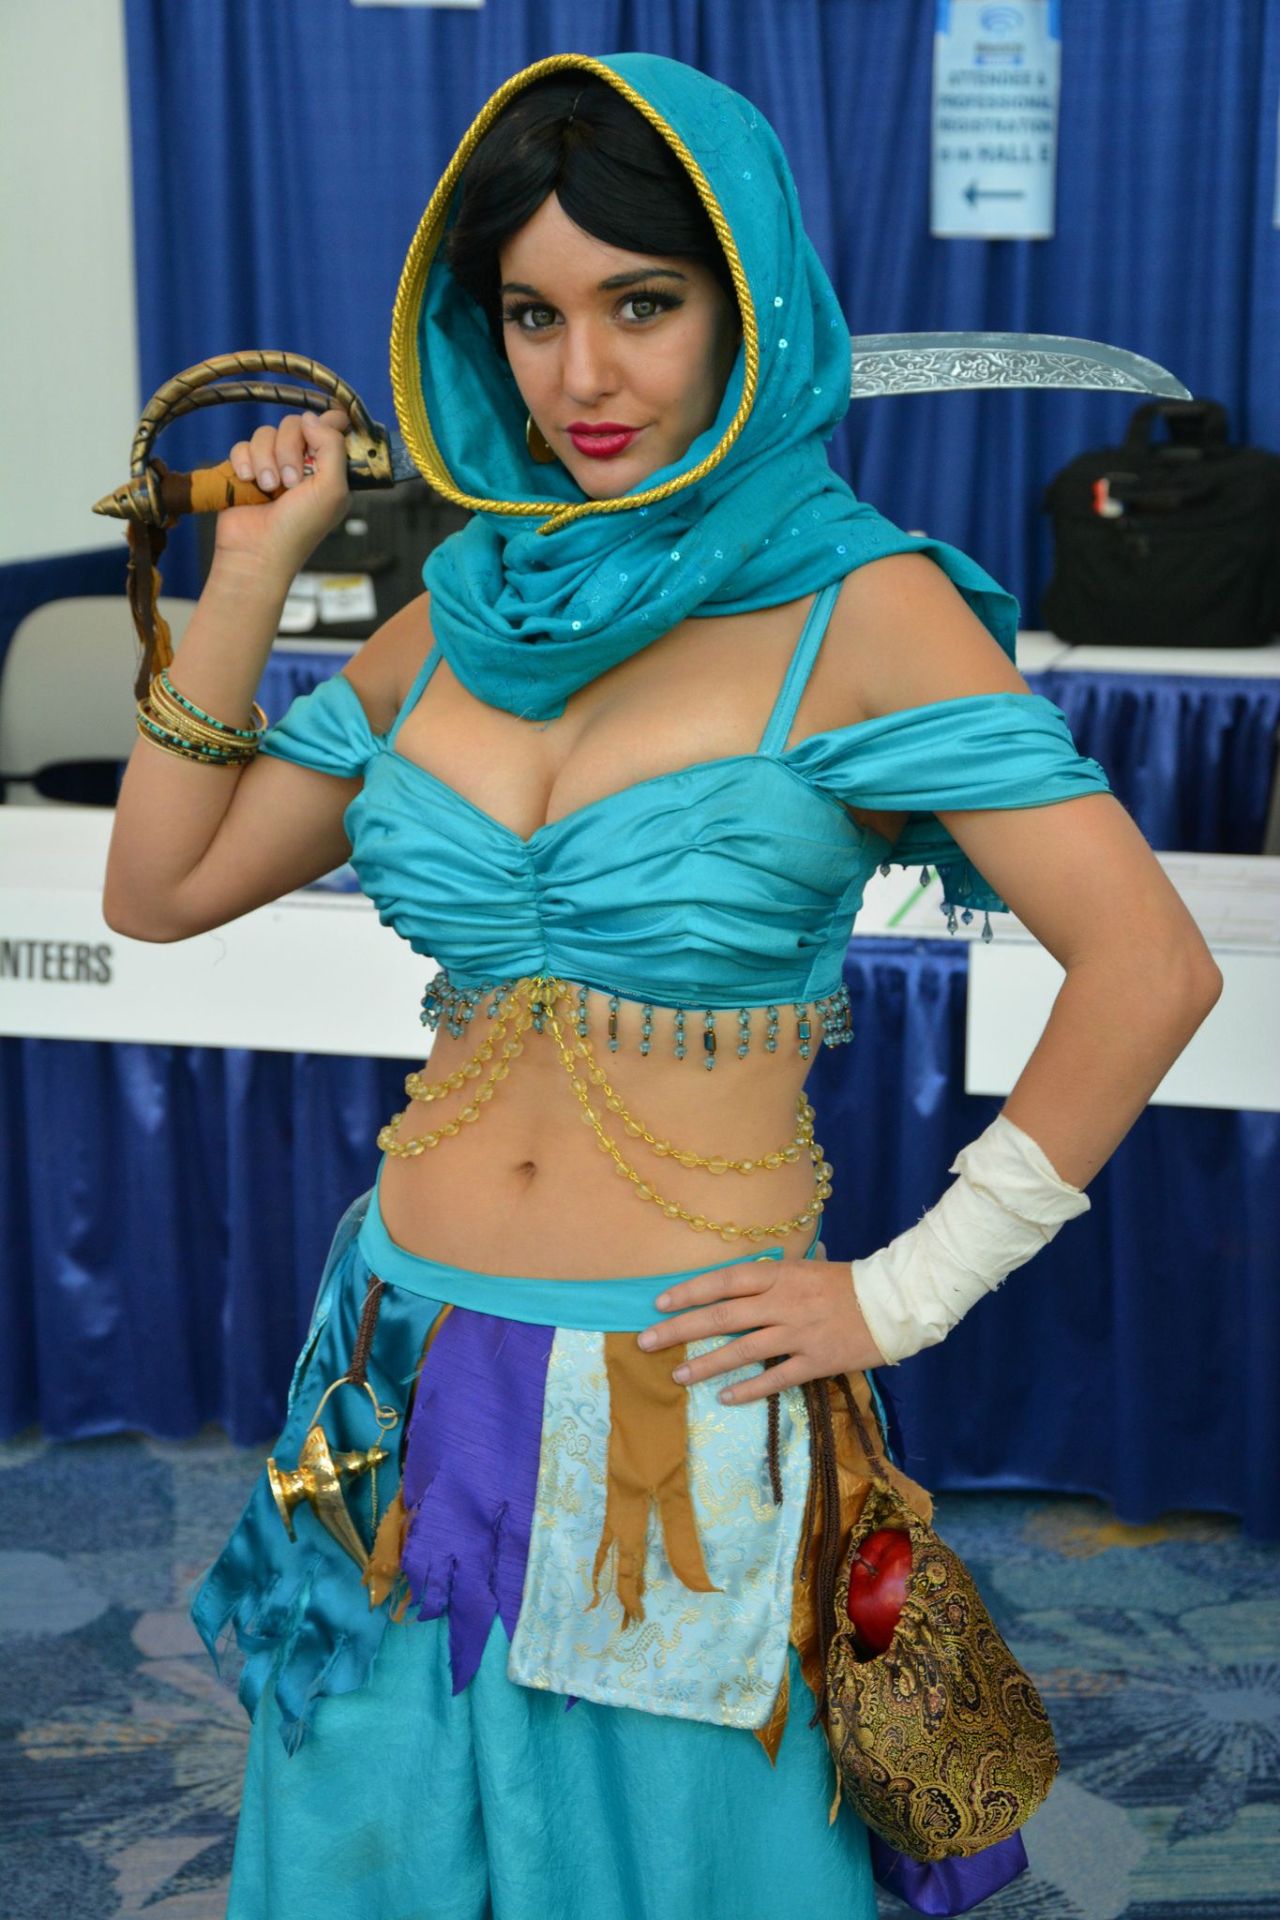 Asian cosplay babe doing the sixtynine